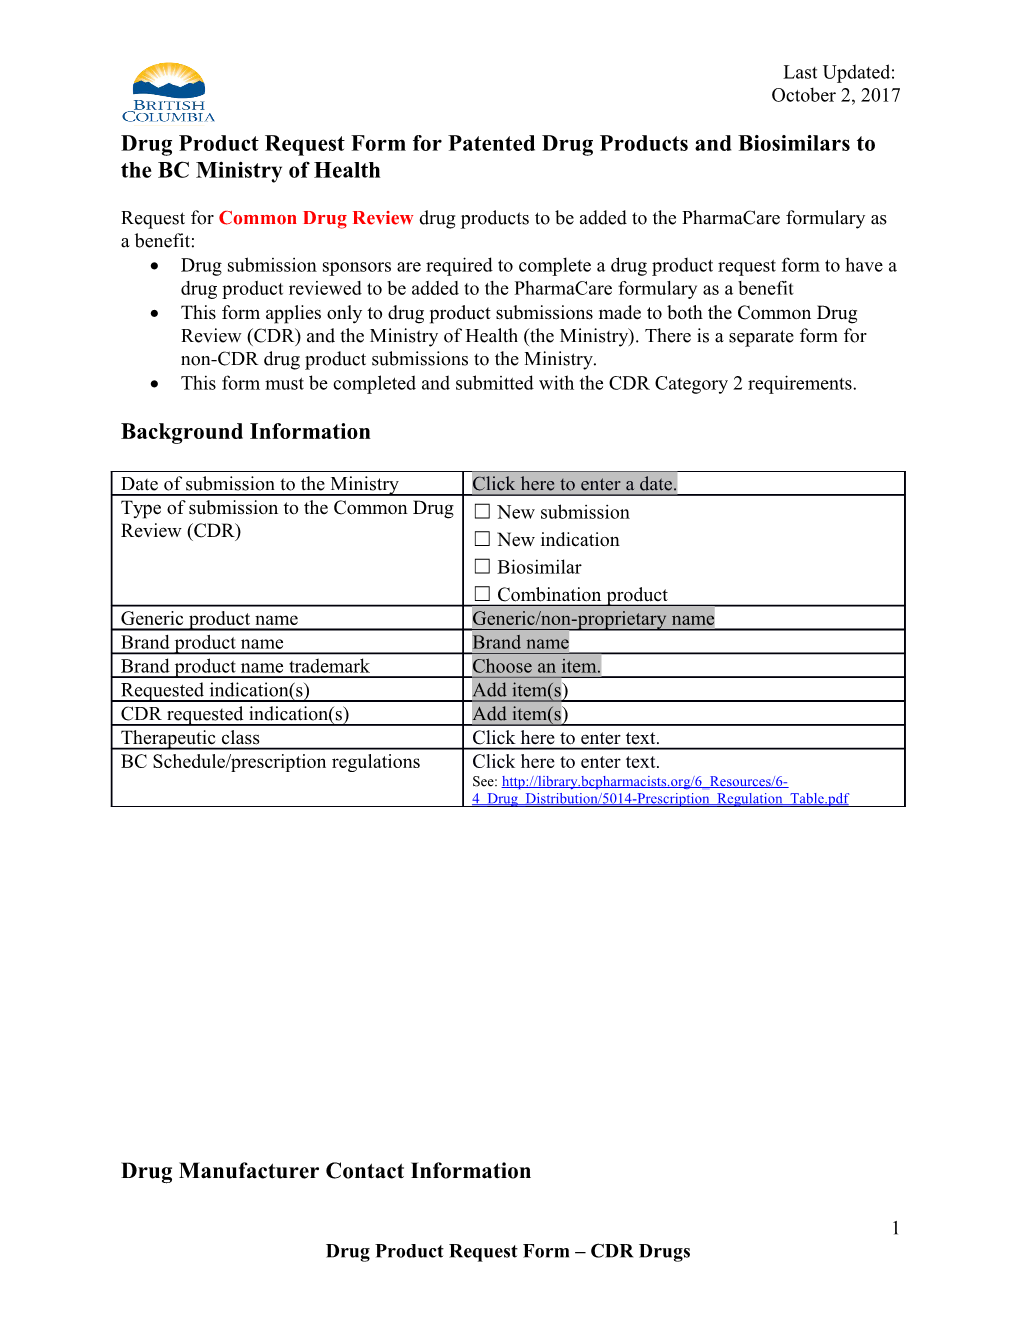 Drug Product Request Form for Patented Drug Products and Biosimilars to the BC Ministry